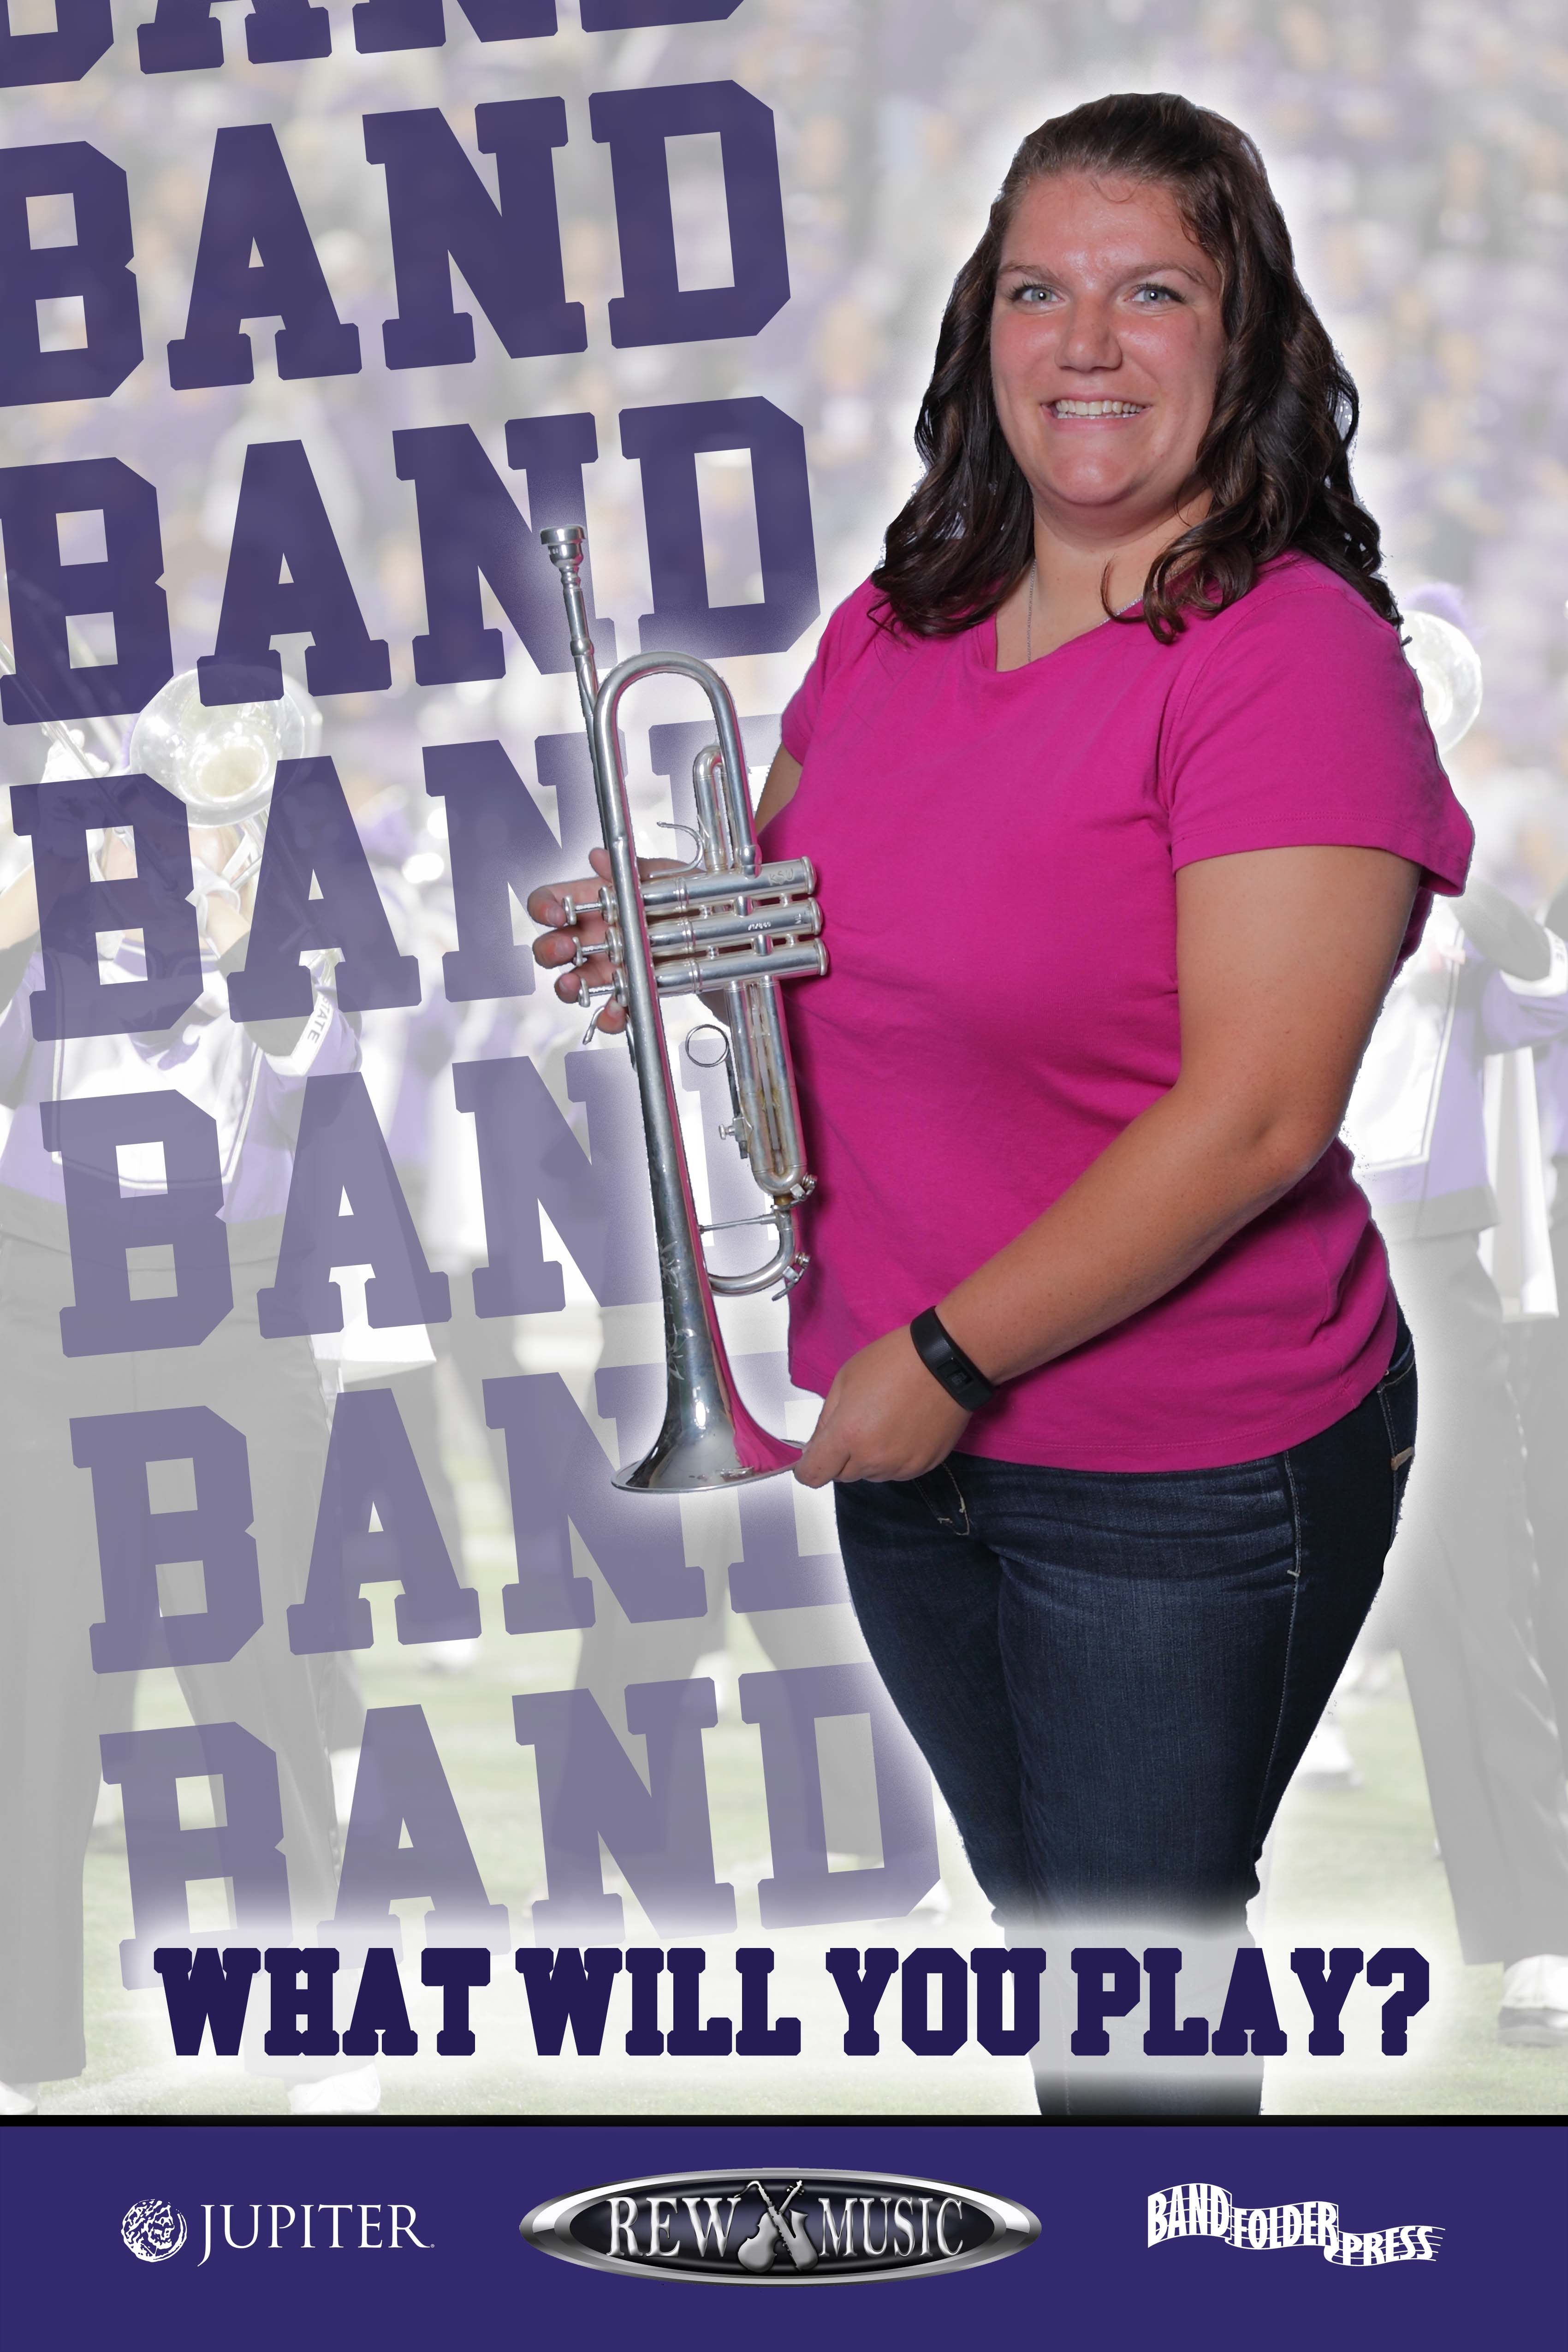 Join the School Band Trumpet player